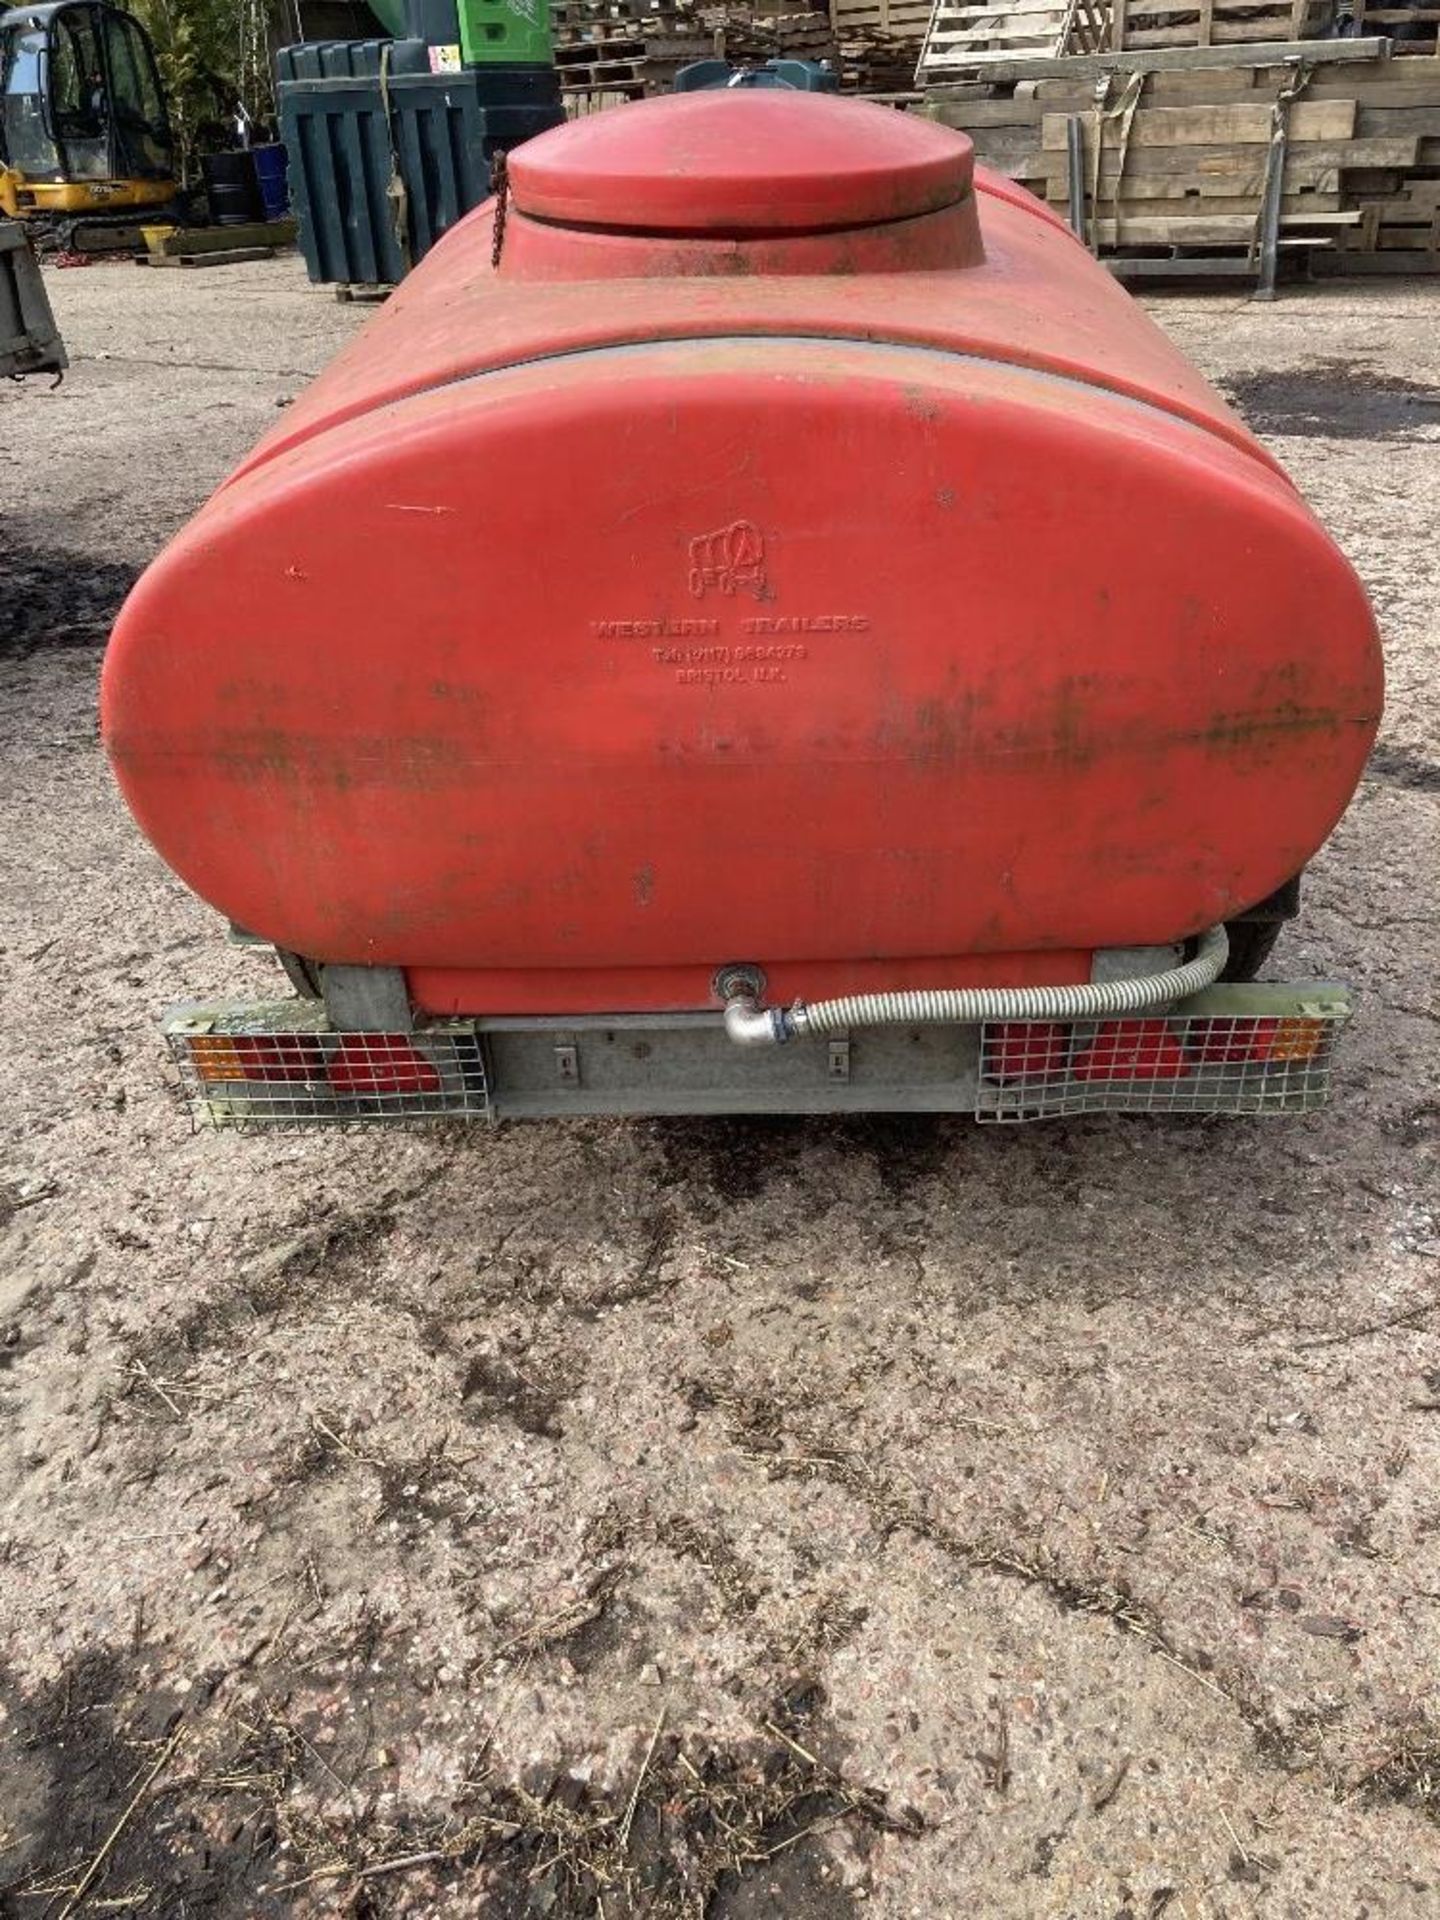 Western Trailers Highway Pressure Washer Water Bowser - Image 4 of 6